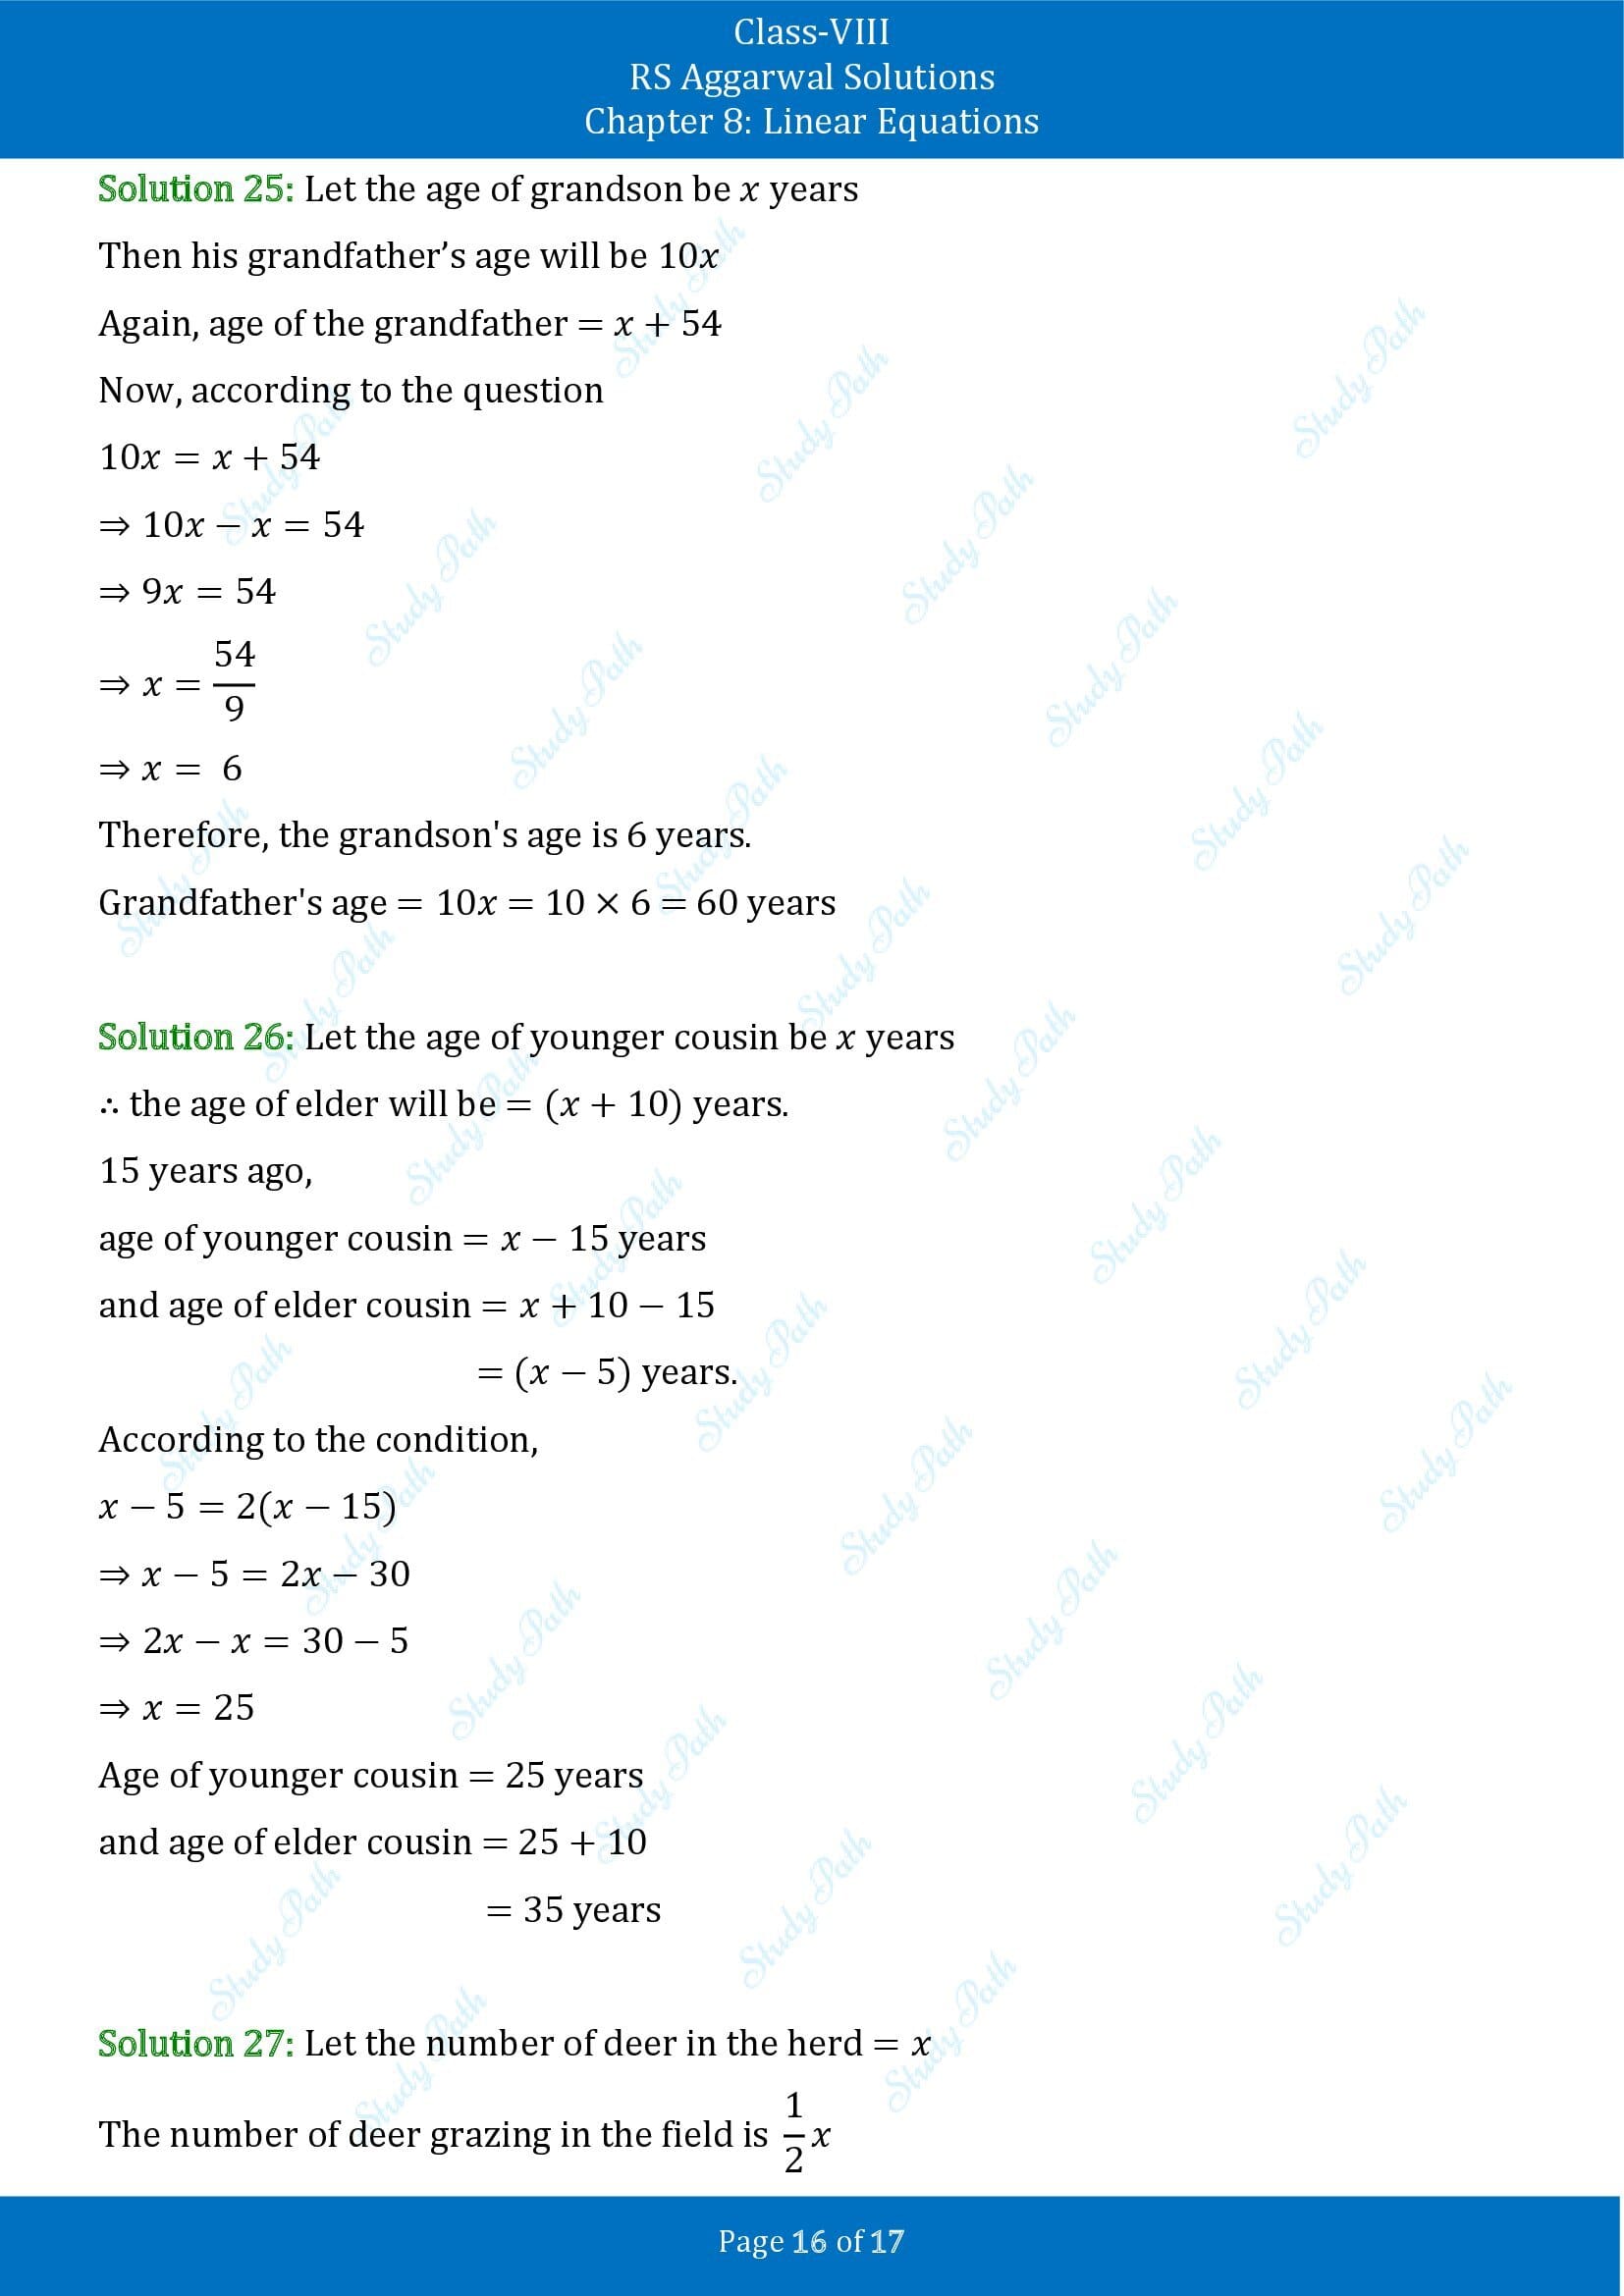 RS Aggarwal Solutions Class 8 Chapter 8 Linear Equations Exercise 8B 00016